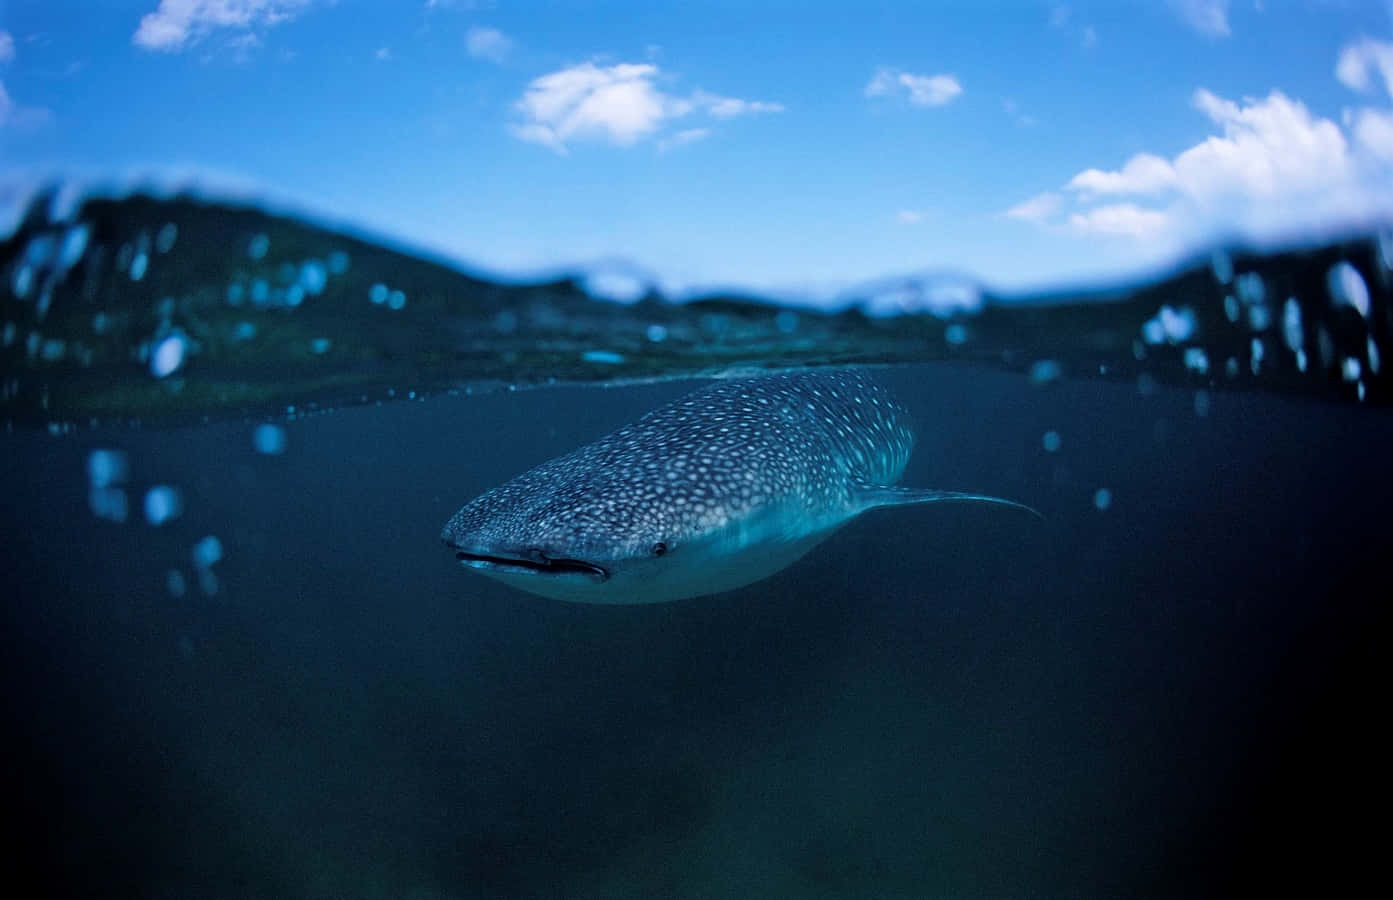 "A majestic whale shark gliding through the waters"